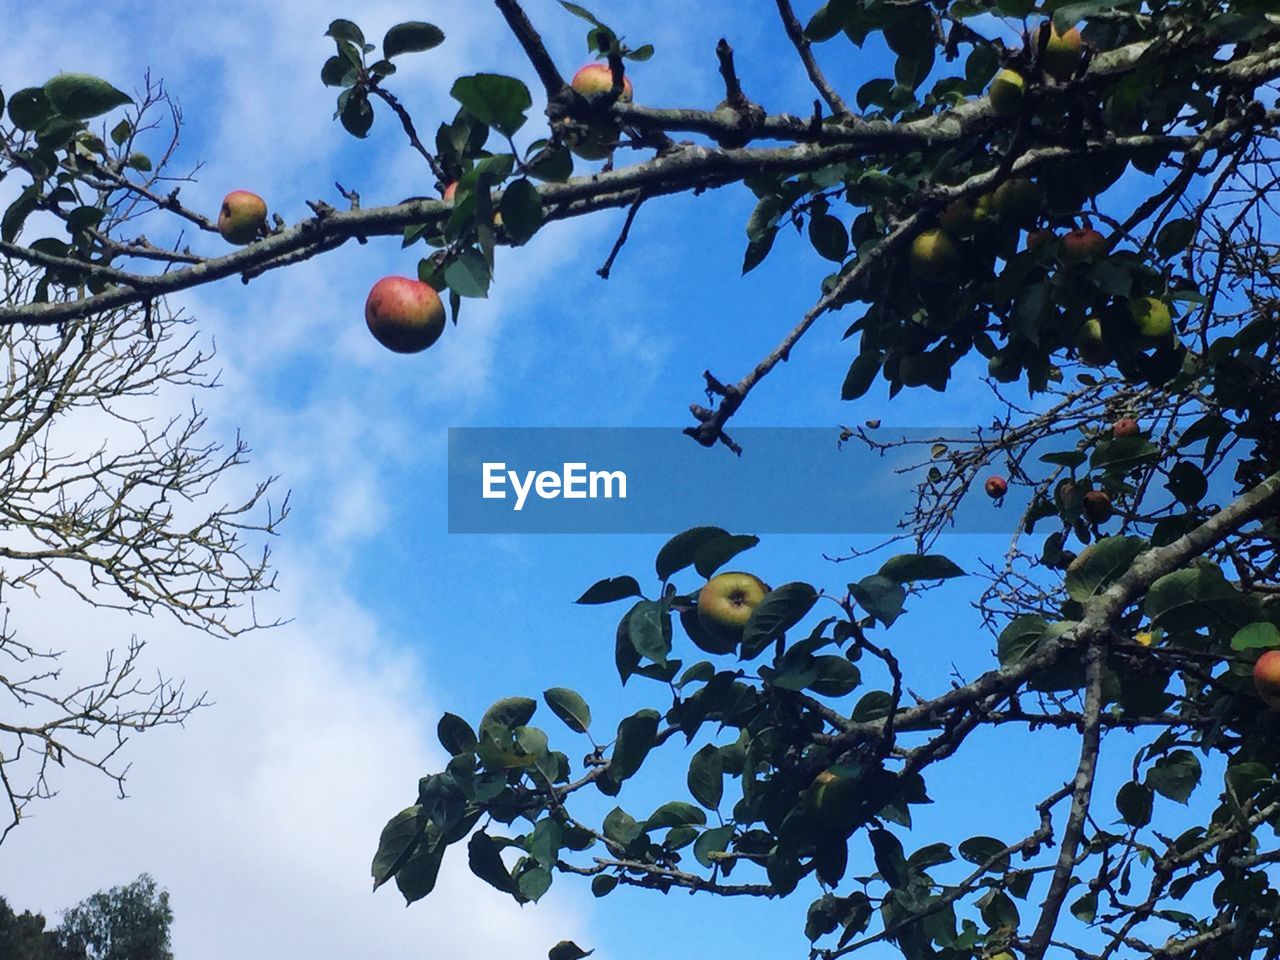 Low angle view of apple hanging on tree against sky